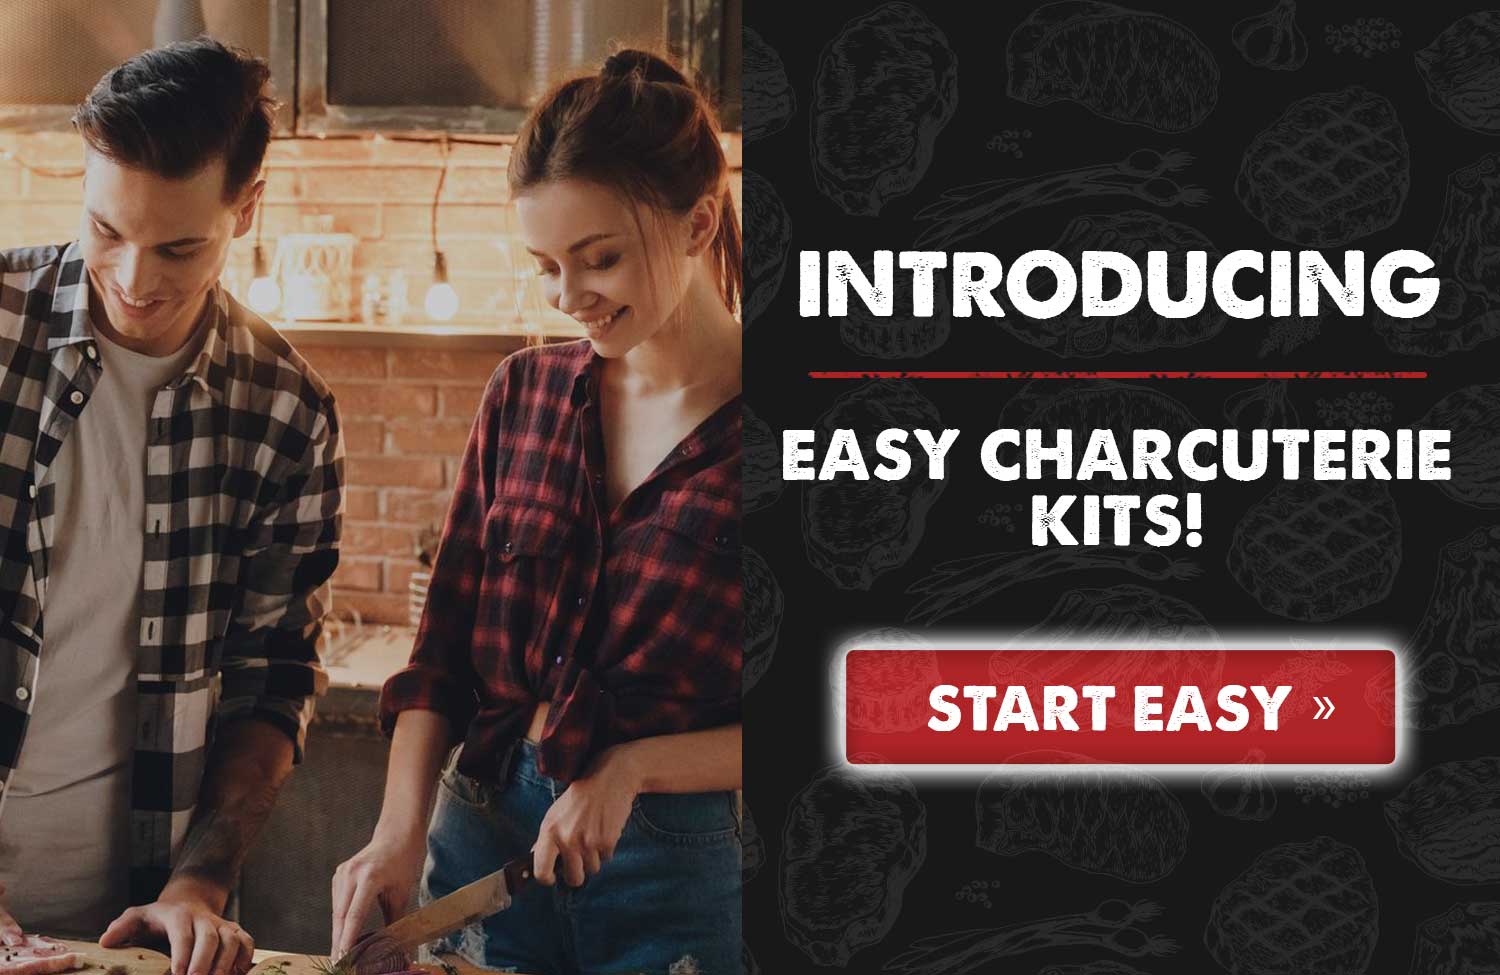 Introducing Easy Charcuterie at Home Kits!